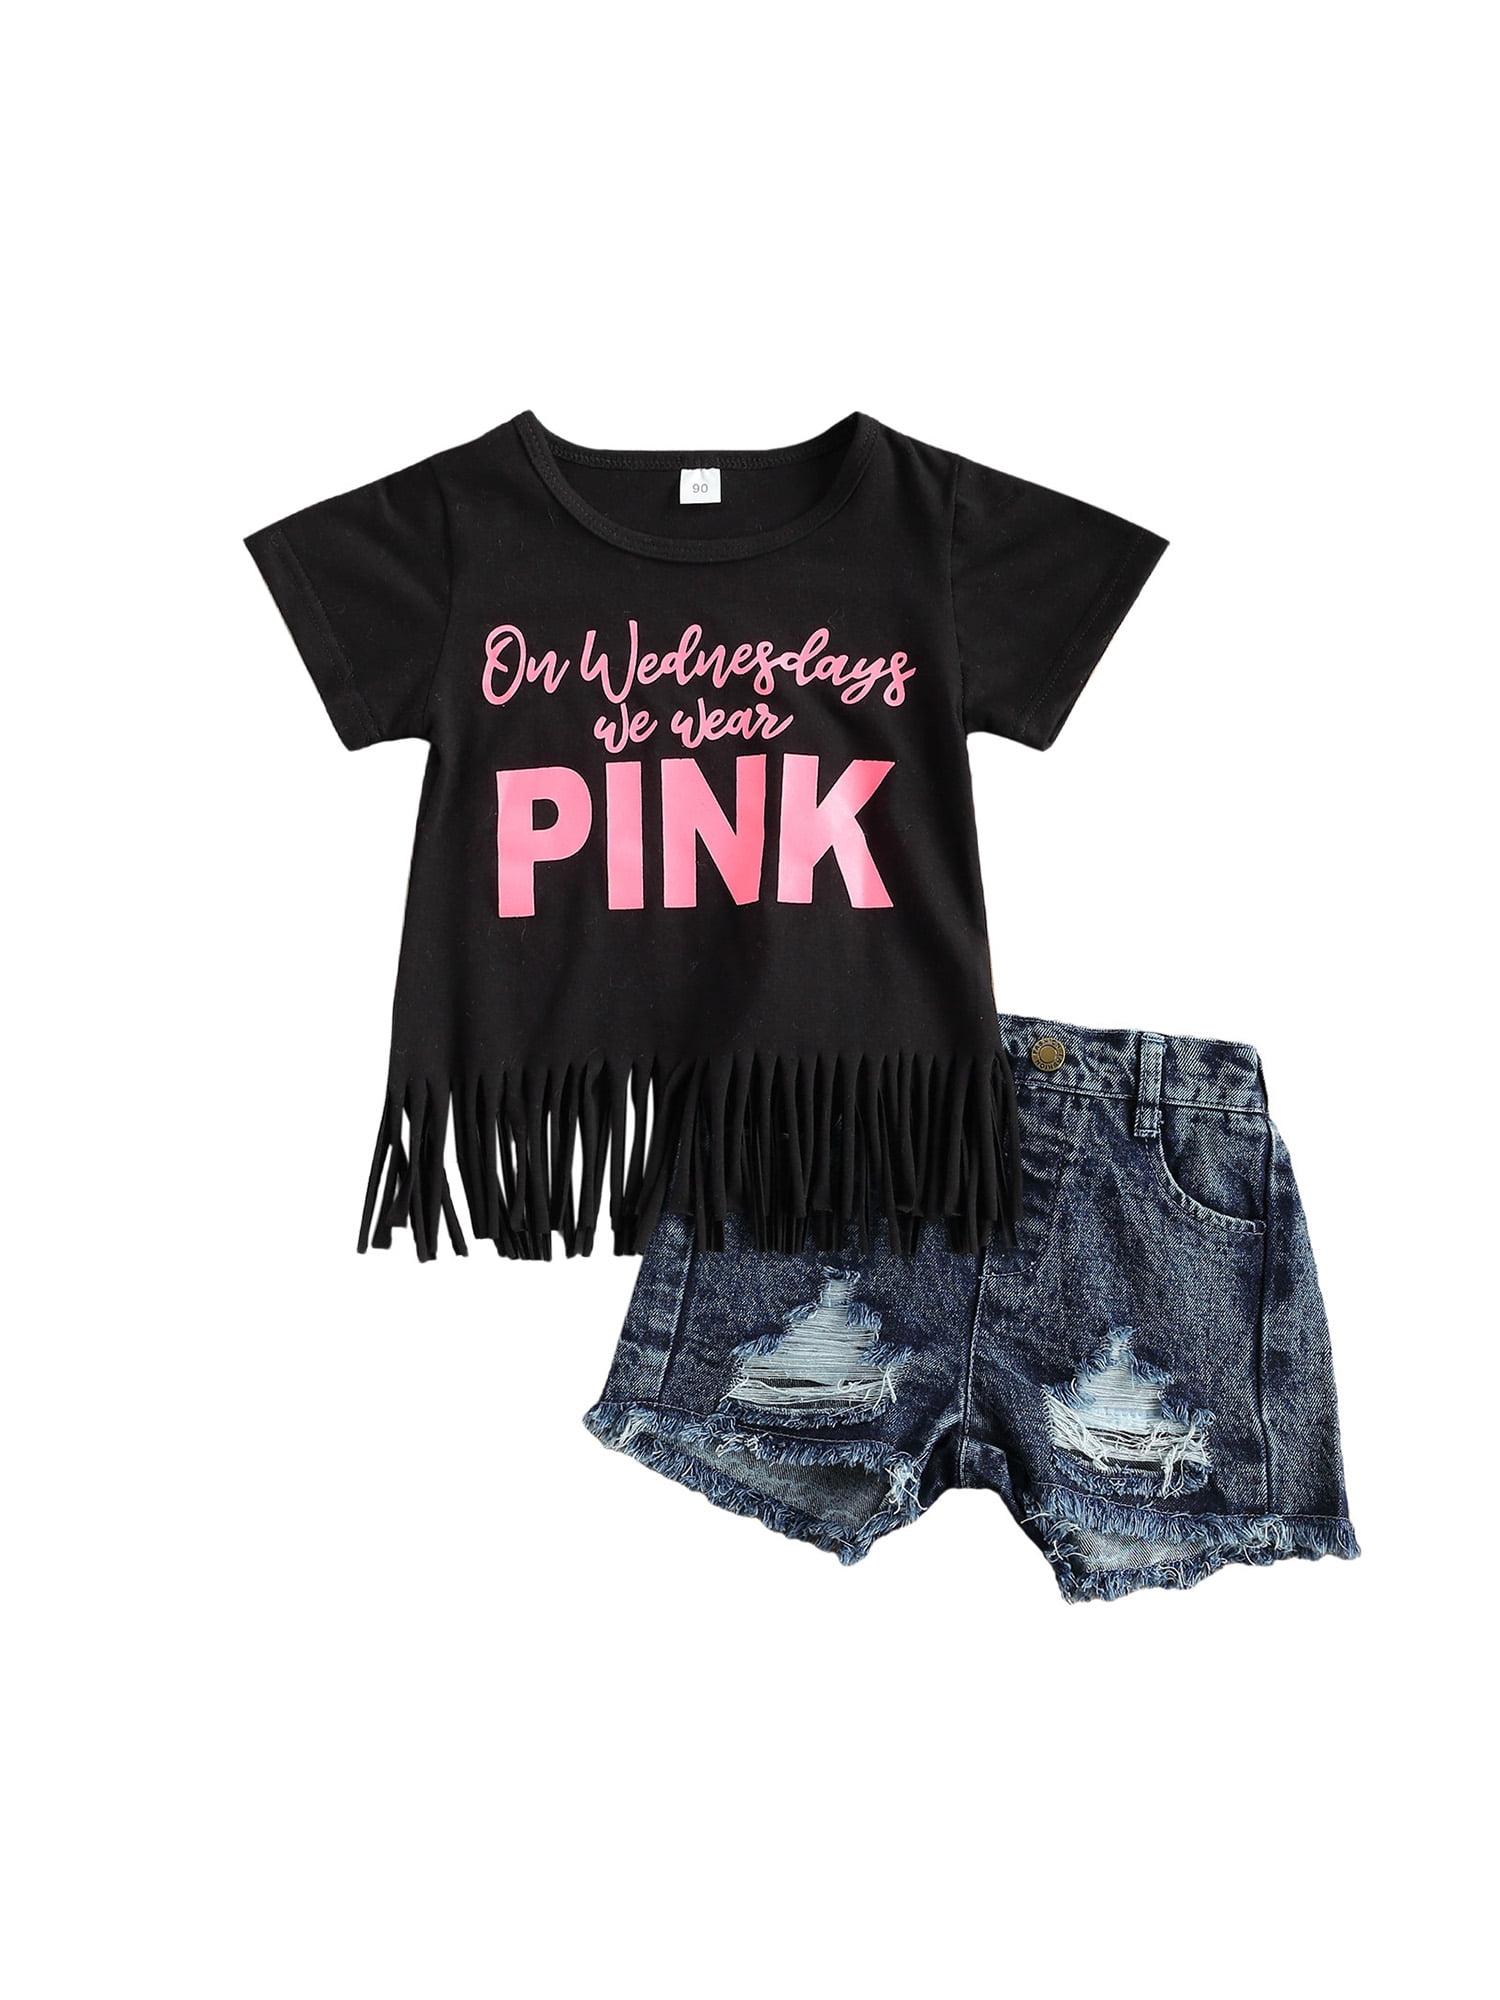 Kids Baby Girl Summer Outfits Short Sleeve Letter T-Shirt Tops Watermelon Tassel Shorts Two Pieces Set Outfit